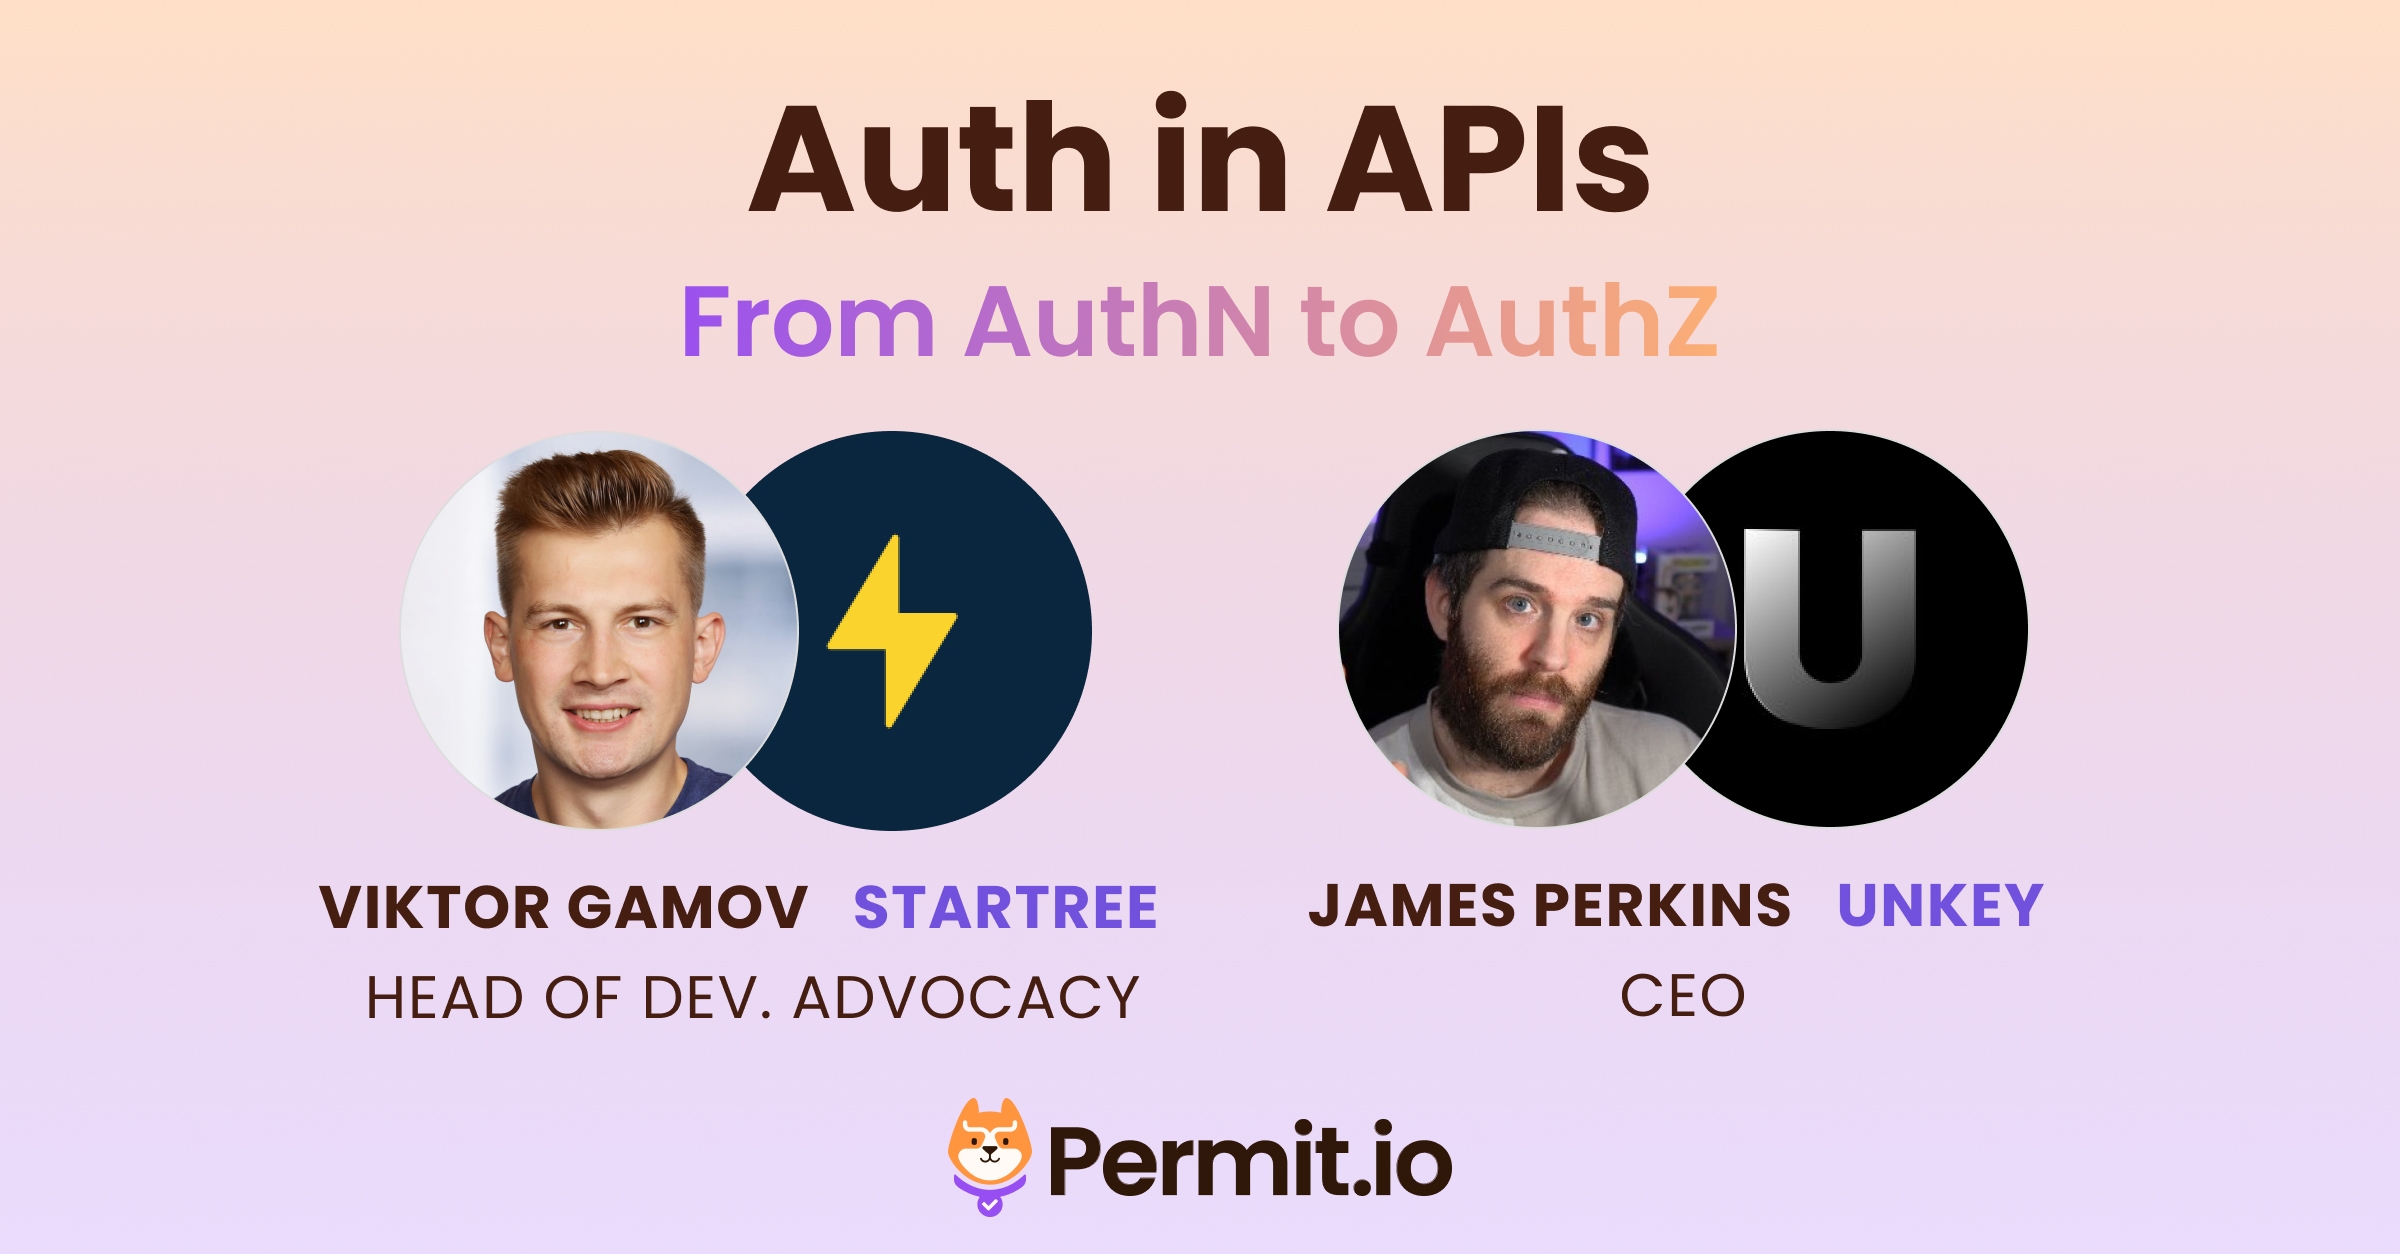 Join James Perkins (CEO @UnKey) and Viktor Gamov (Dev. Advocate @Kong) in our upcoming webinar, "Auth in APIs - From AuthN to AuthZ", where we discuss the ins and outs of API authentication and authorization.